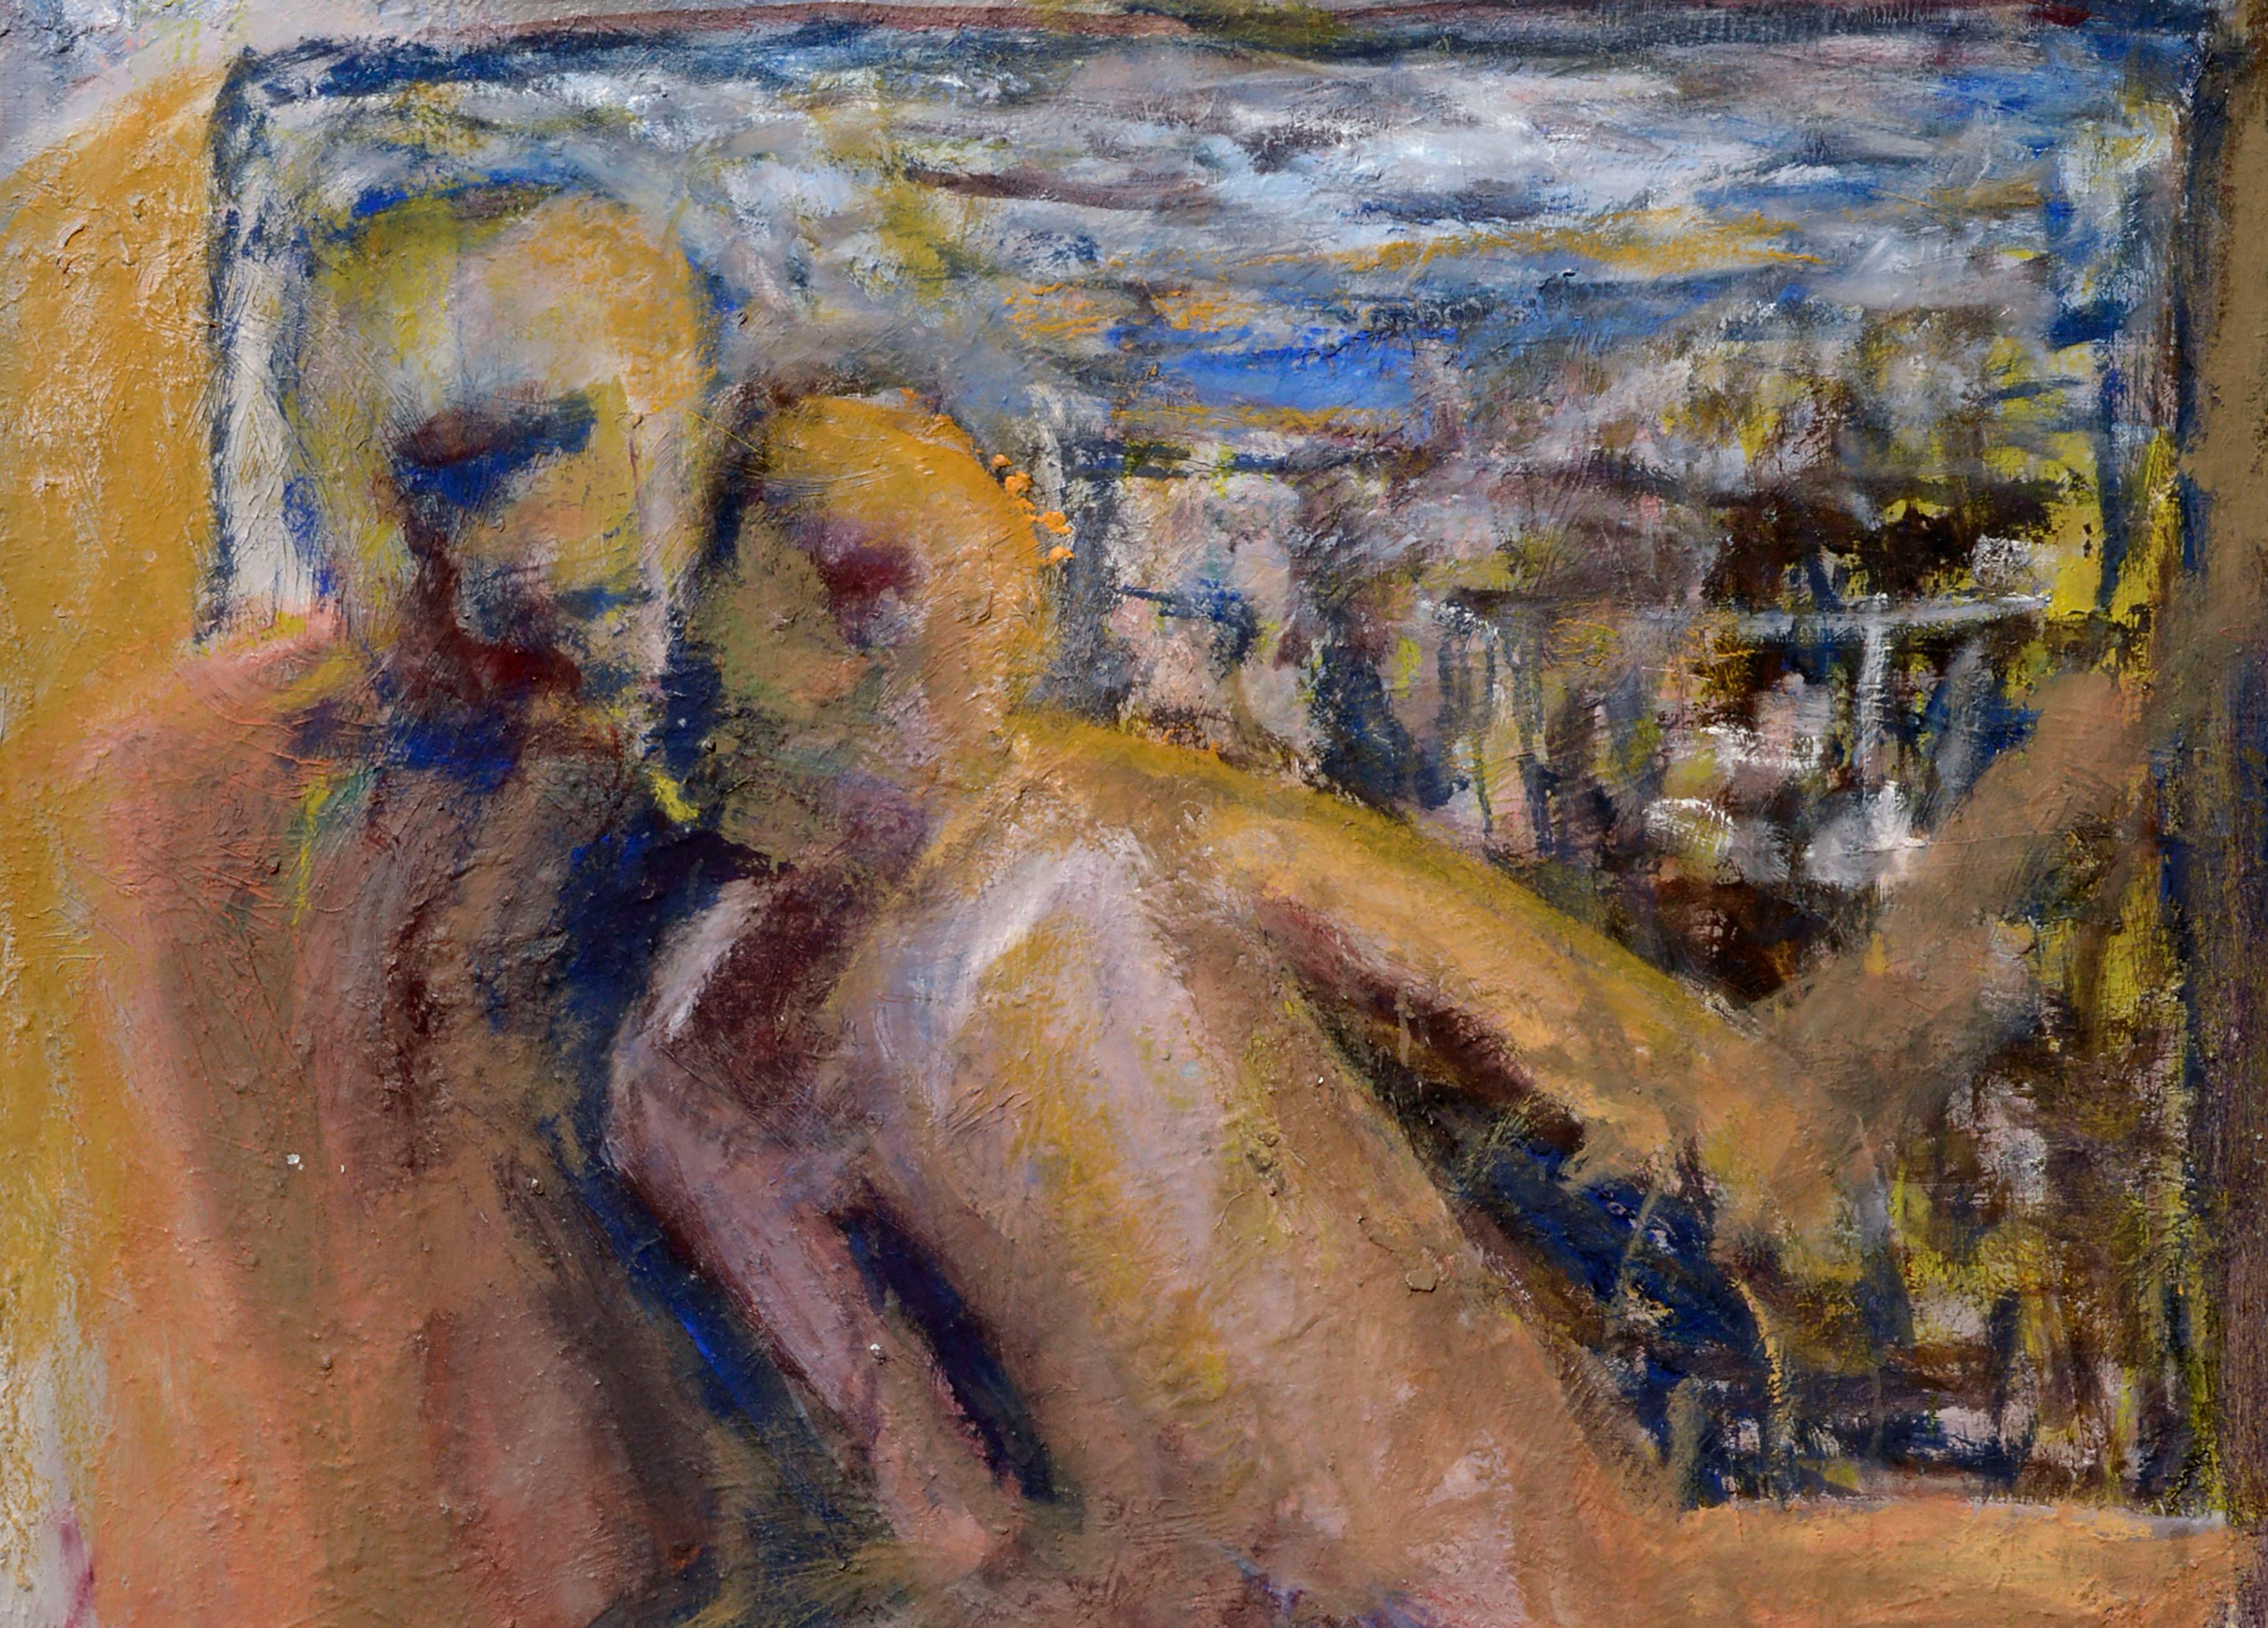 Large Scale Abstract Expressionist Figruative -- Nude Couple - Painting by Daniel David Fuentes